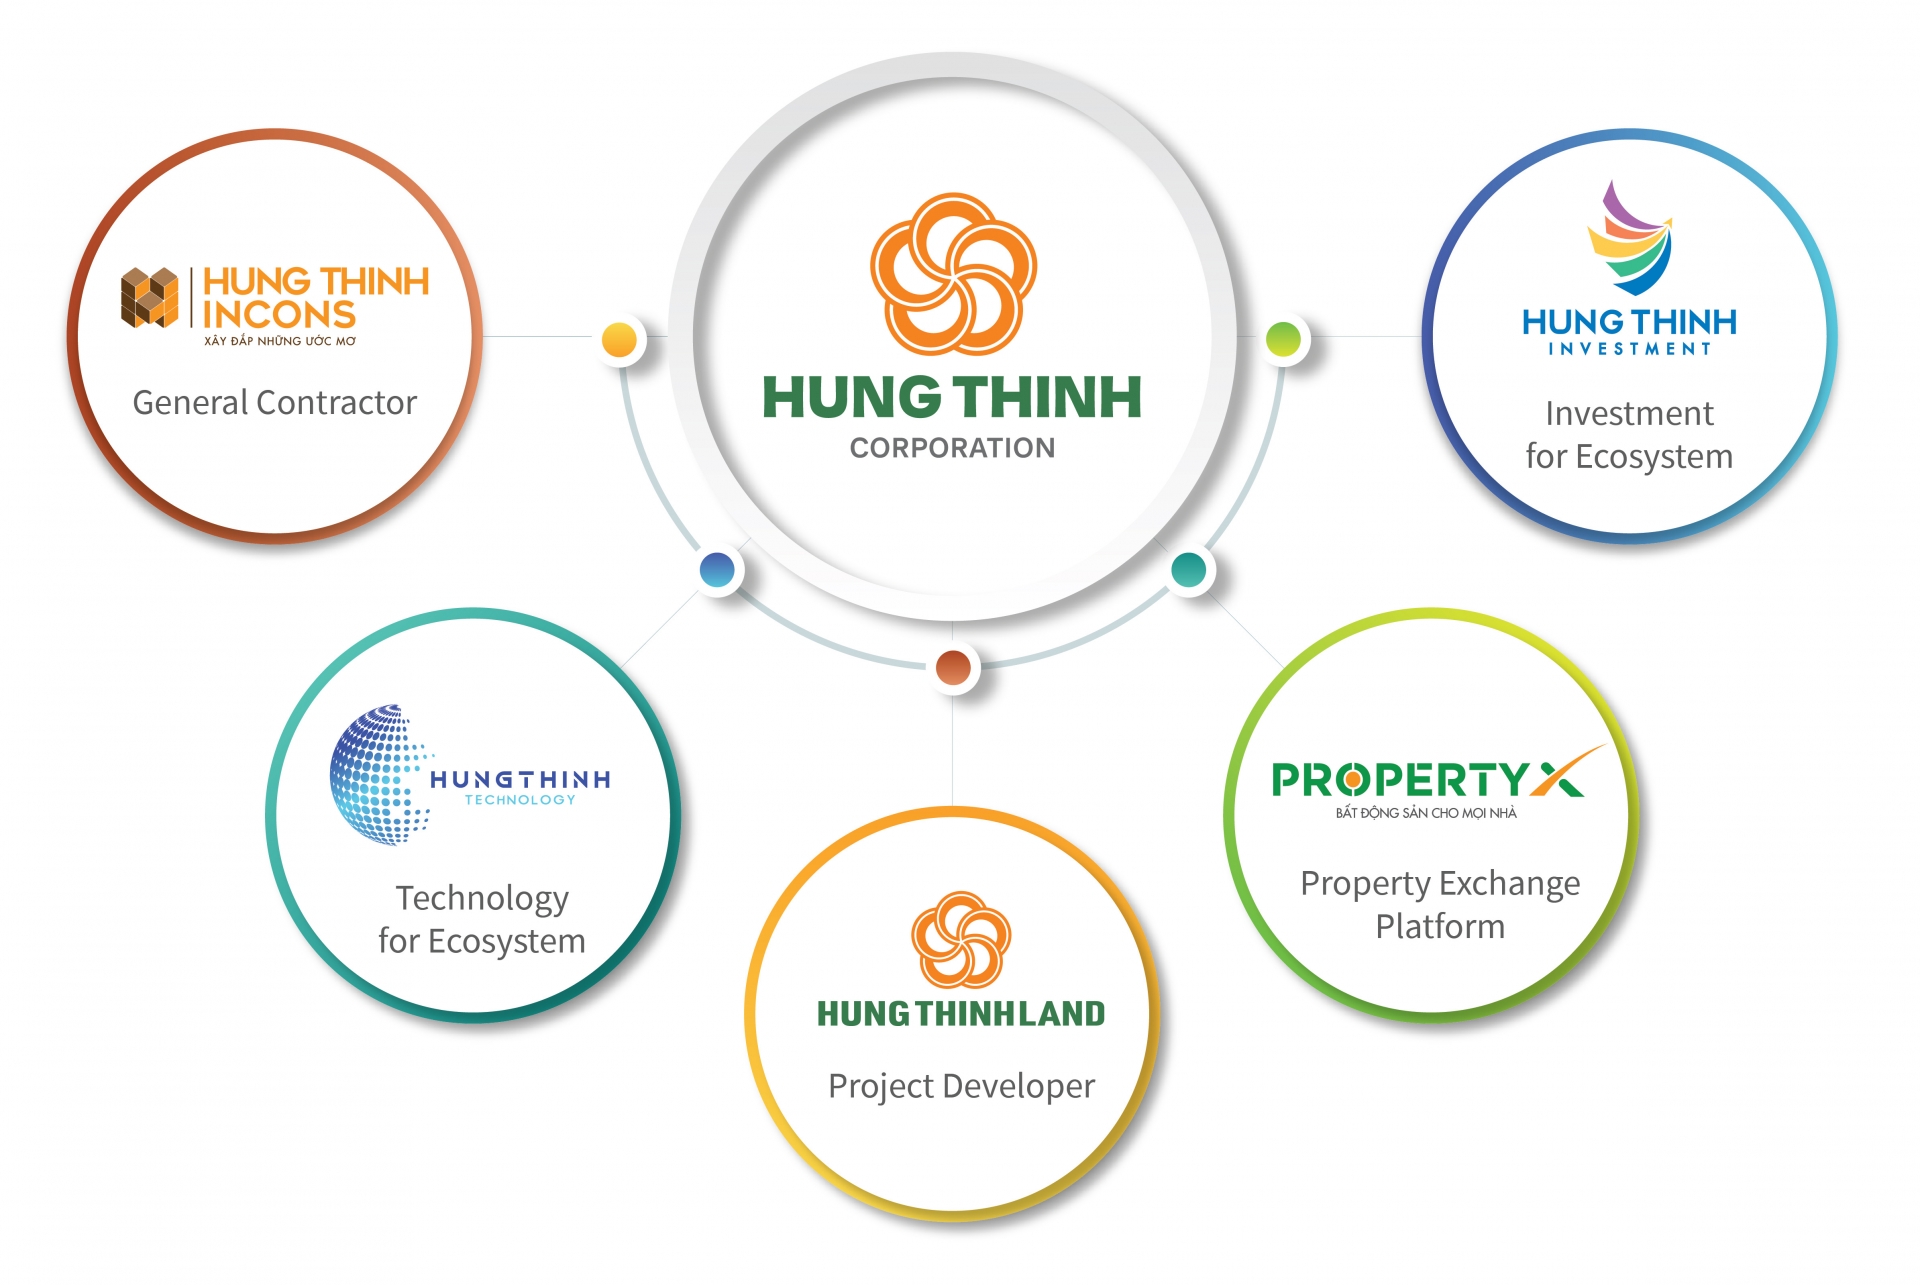 hung thinh land posted strong growth in scale